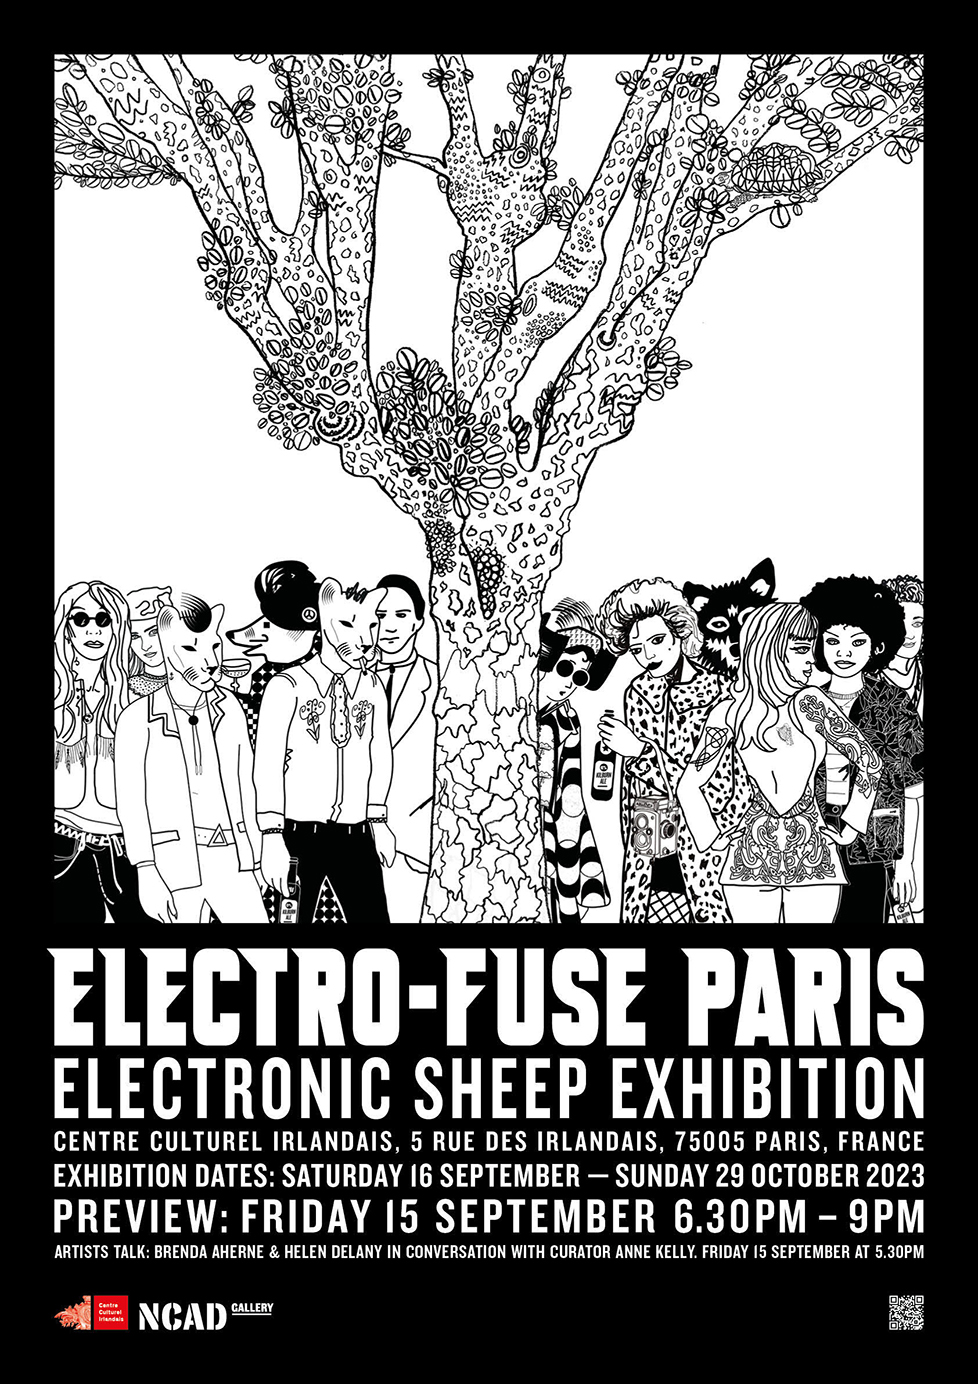 ELECTO-FUSE Paris | Electronic Sheep | Saturday 16 September – Sunday 29 October 2023 | | Image: old-style, black-and-white poster (except for one logo); effectively a line drawing, though with some black-filled elements; we see a tree in the middle of the scene with its sparsely leaved branches spreading out over the heads of group of maybe 12 youngish-looking people all looking towards us; they are in party-going gear (probably), and four of them are wearing full-head masks – two feline, one rattih, one canine 